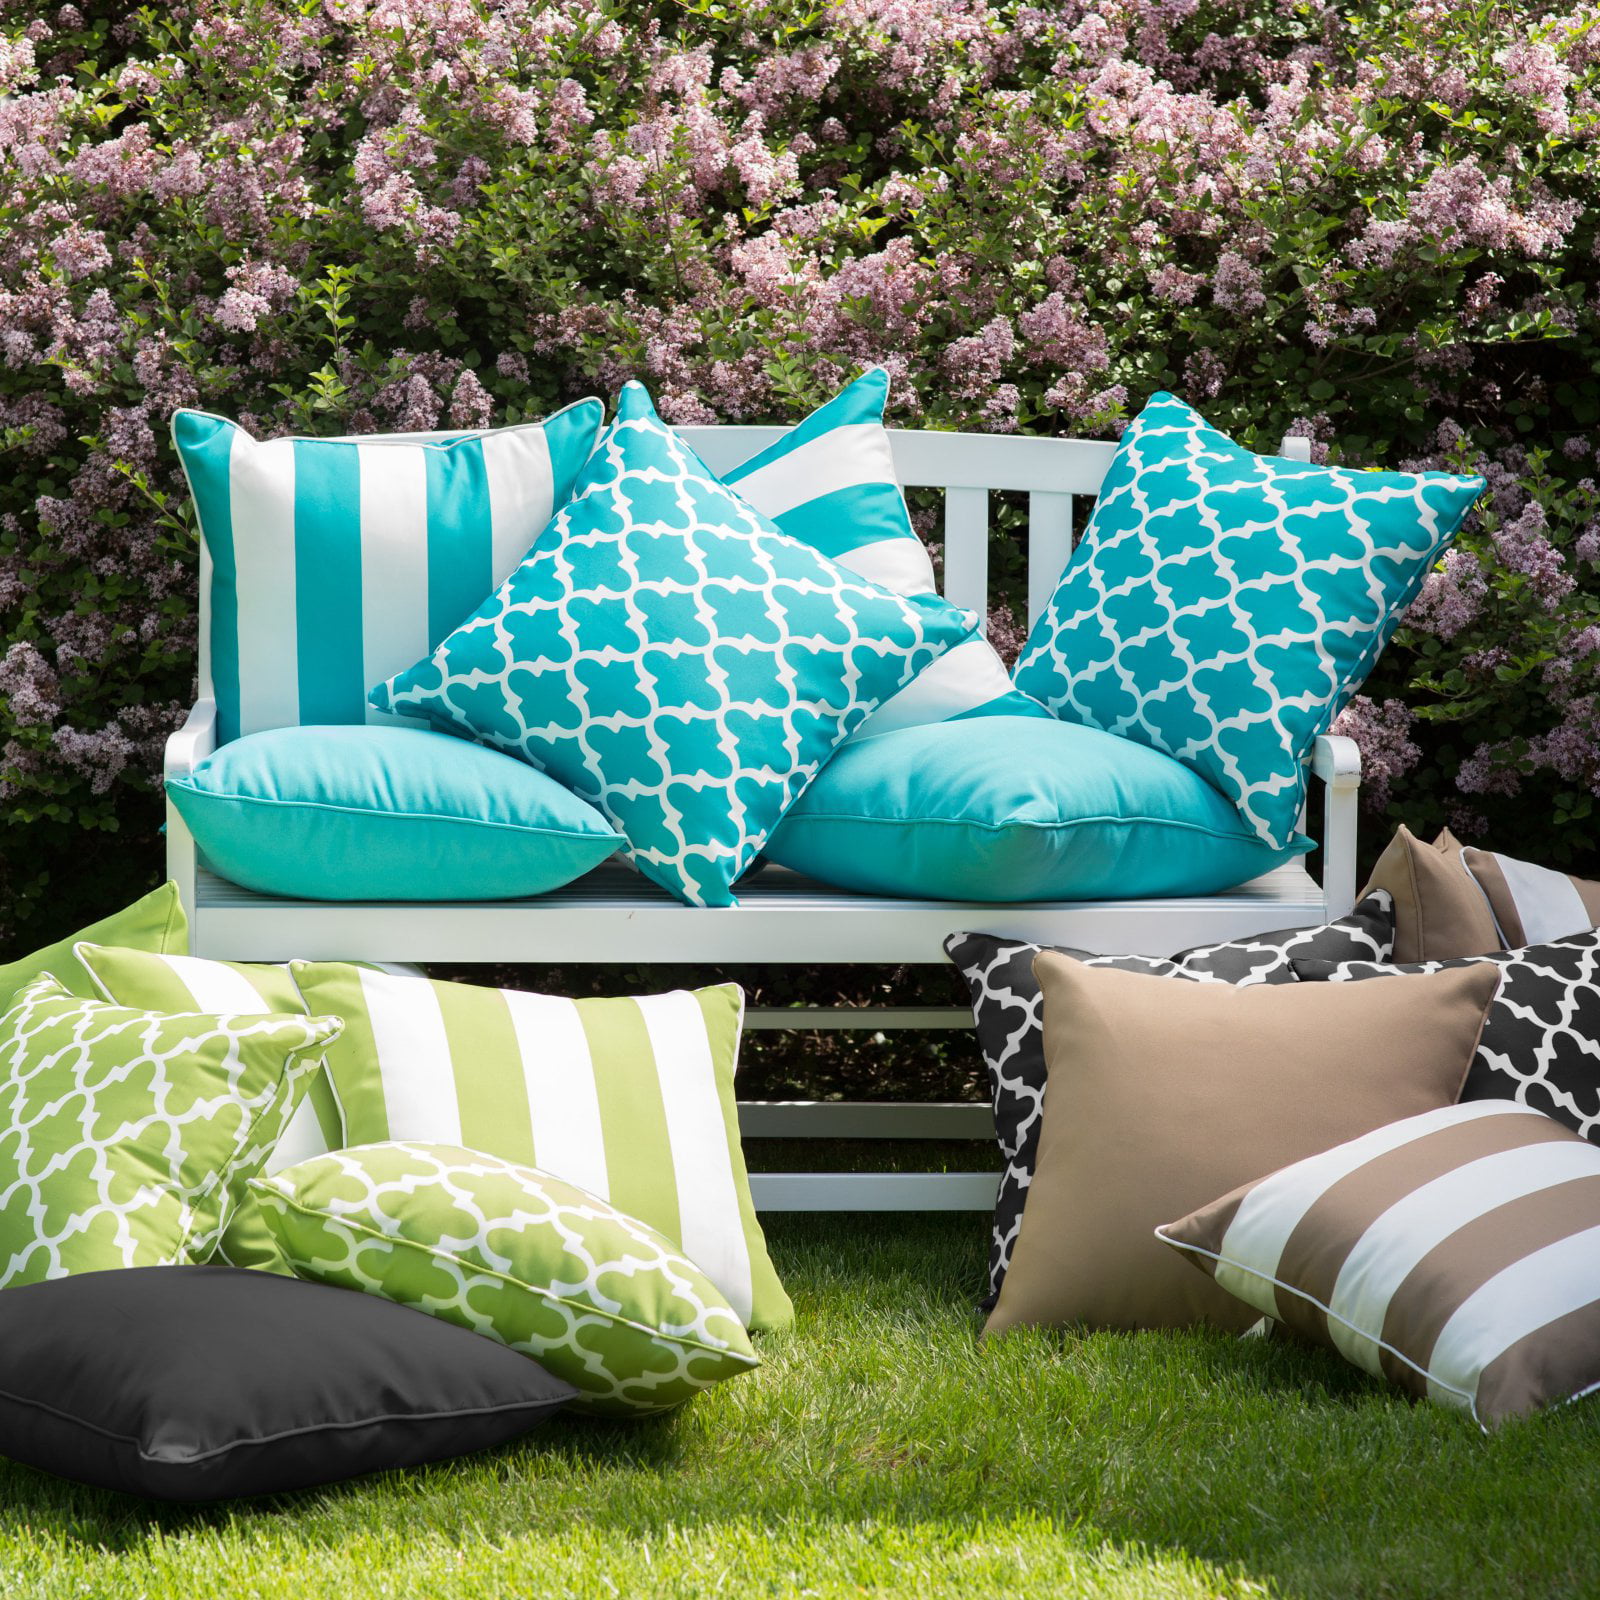 Outdoor Cushions Dubai - Get Best Quality Cushions for your Home